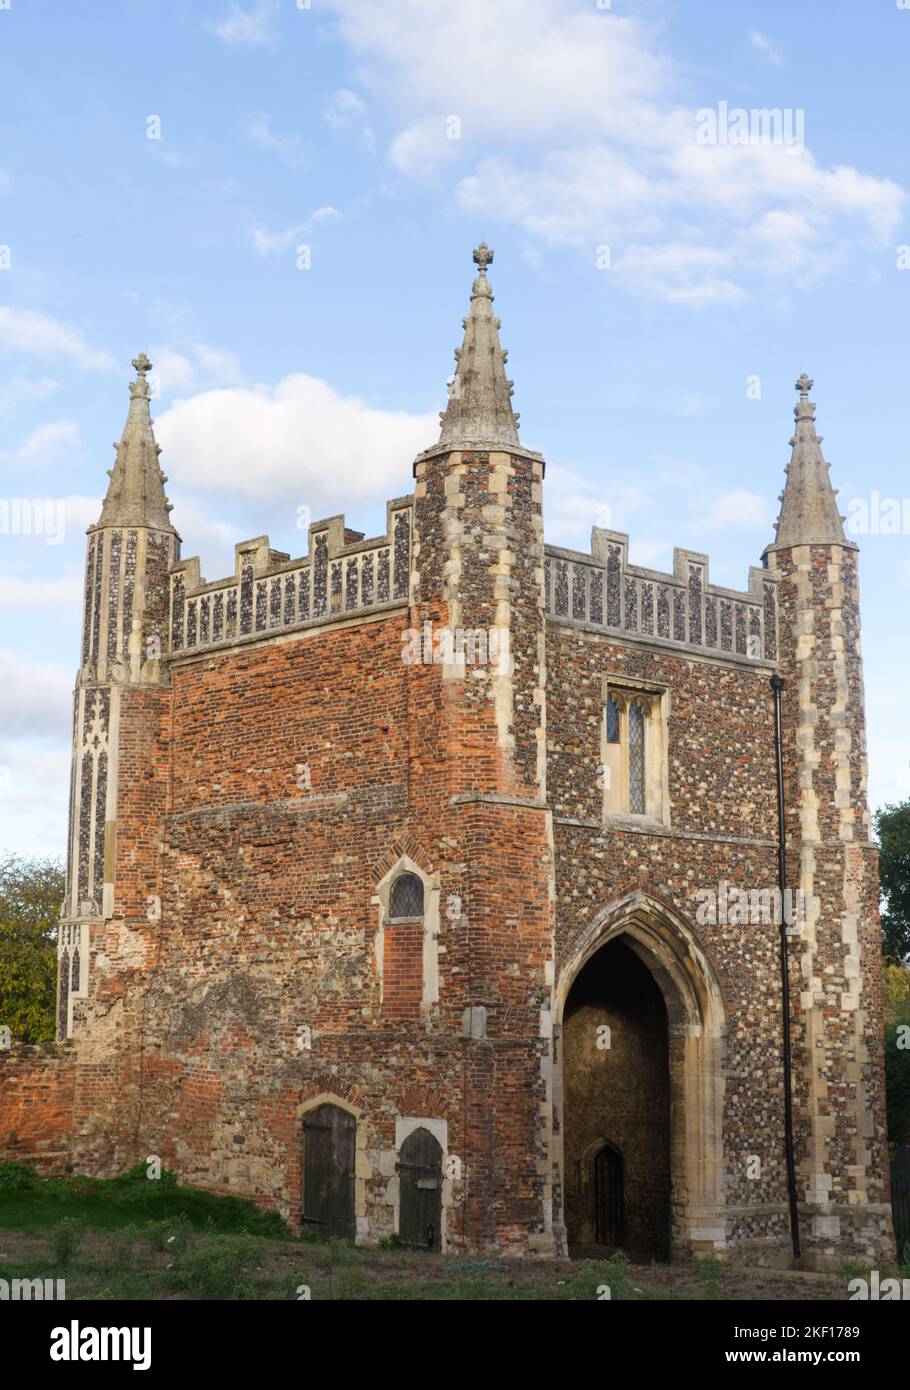 St John's Abbey Gate, the surviving part of the Benedictine abbey of St John in Colchester, Essex. The gatehouse in mainly built using flint and brick Stock Photo